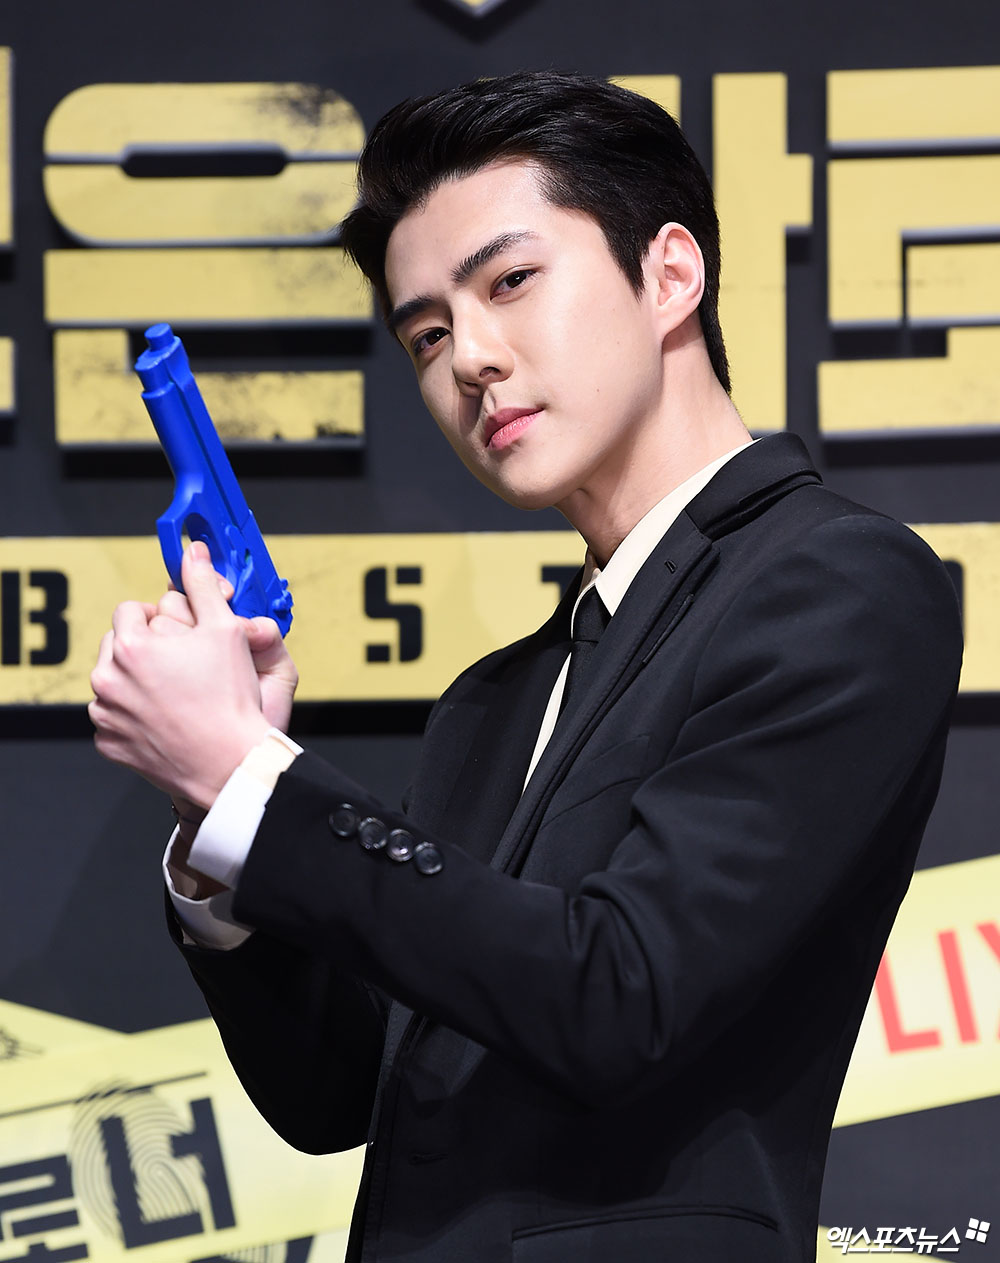 The Netflix original series You are the perpetrator! At the Seoul Sinsa-dong, Gangnam CGV Apgujeong store on the 8th.EXO Sehun, who attended the Season 2 production presentation, has photo time.